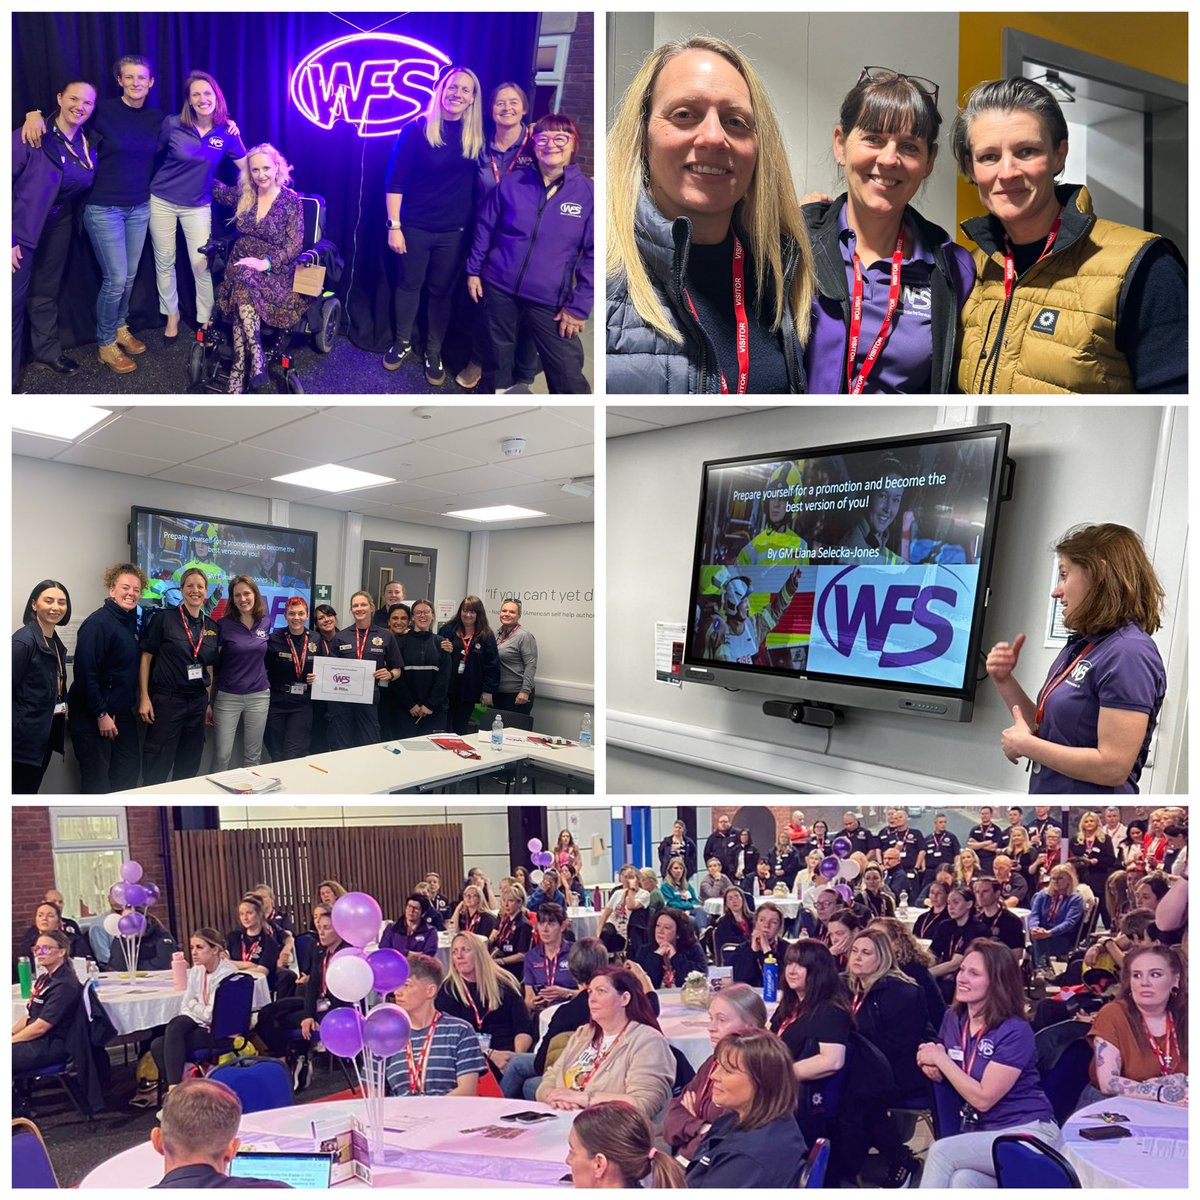 Incredible day @manchesterfire hosting @WFSUK1 regional event. The energy was so uplifting with so many inspirational women & purple shirts united💜 Amazing role models🔥 #GreaterTogether @ESFRSJKing @SunitaGamblin @Suzziesue595 @antarctic_fire @miriamheppellHR @AlexJJohnson999